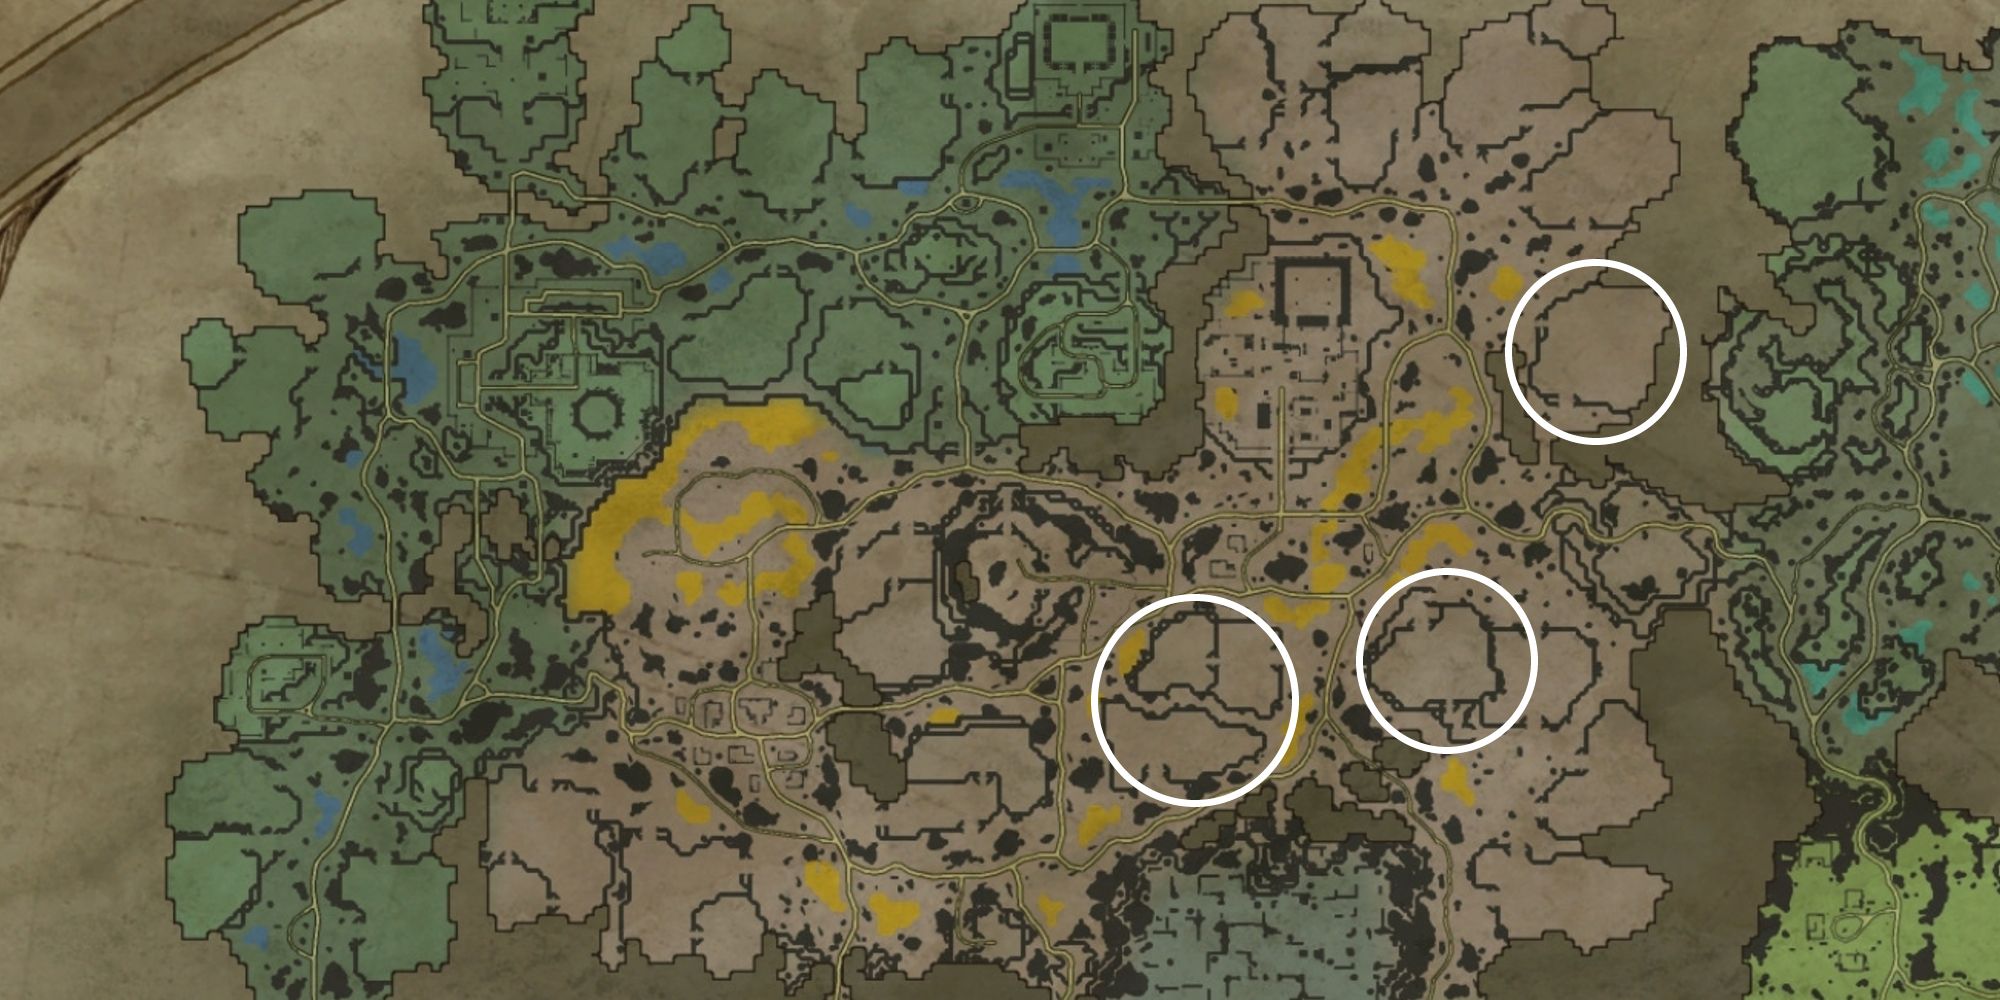 v rising gloomrot map with locations for potential bases